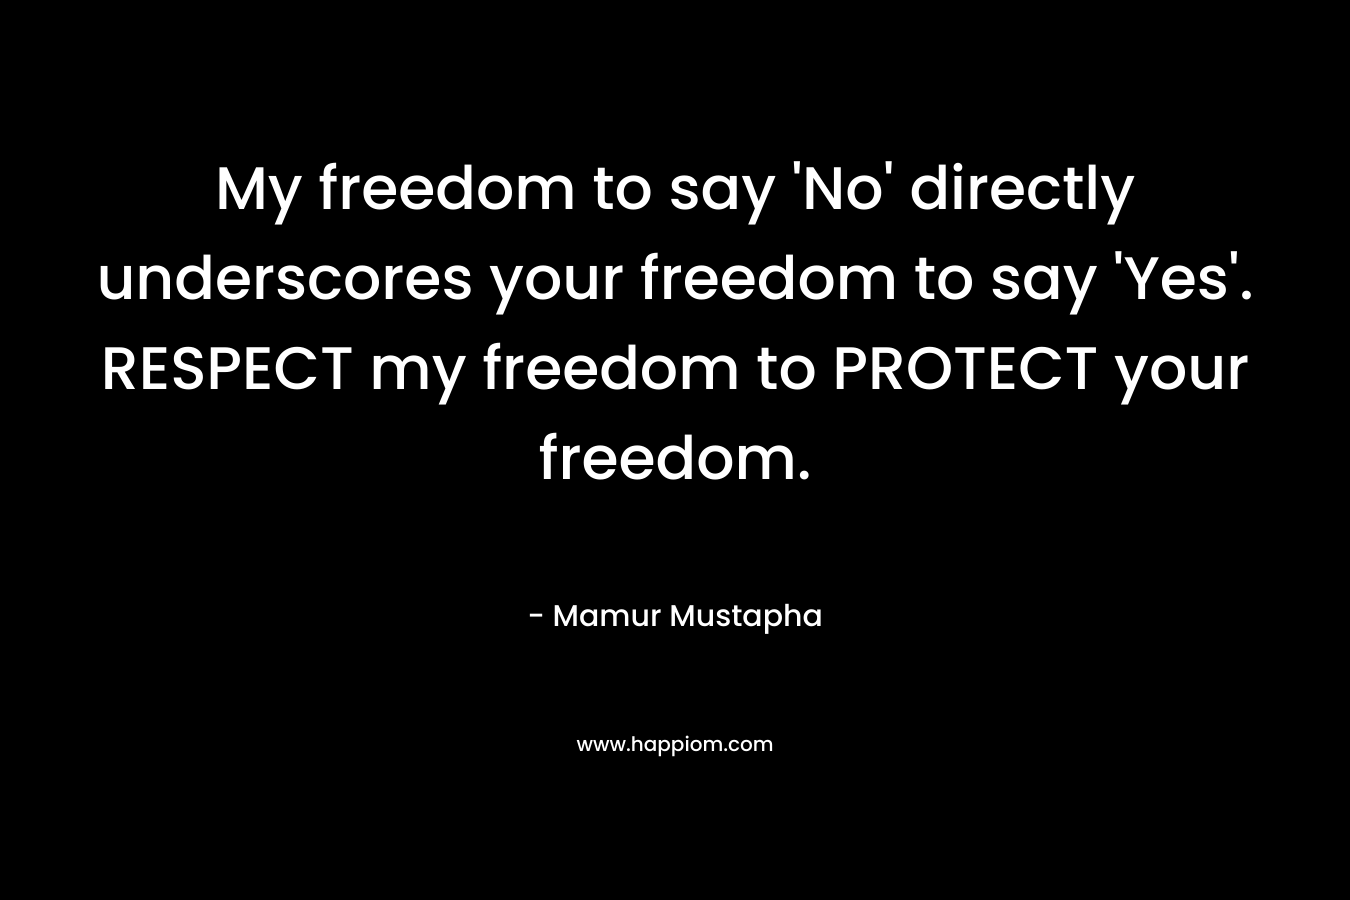 My freedom to say ‘No’ directly underscores your freedom to say ‘Yes’. RESPECT my freedom to PROTECT your freedom. – Mamur Mustapha